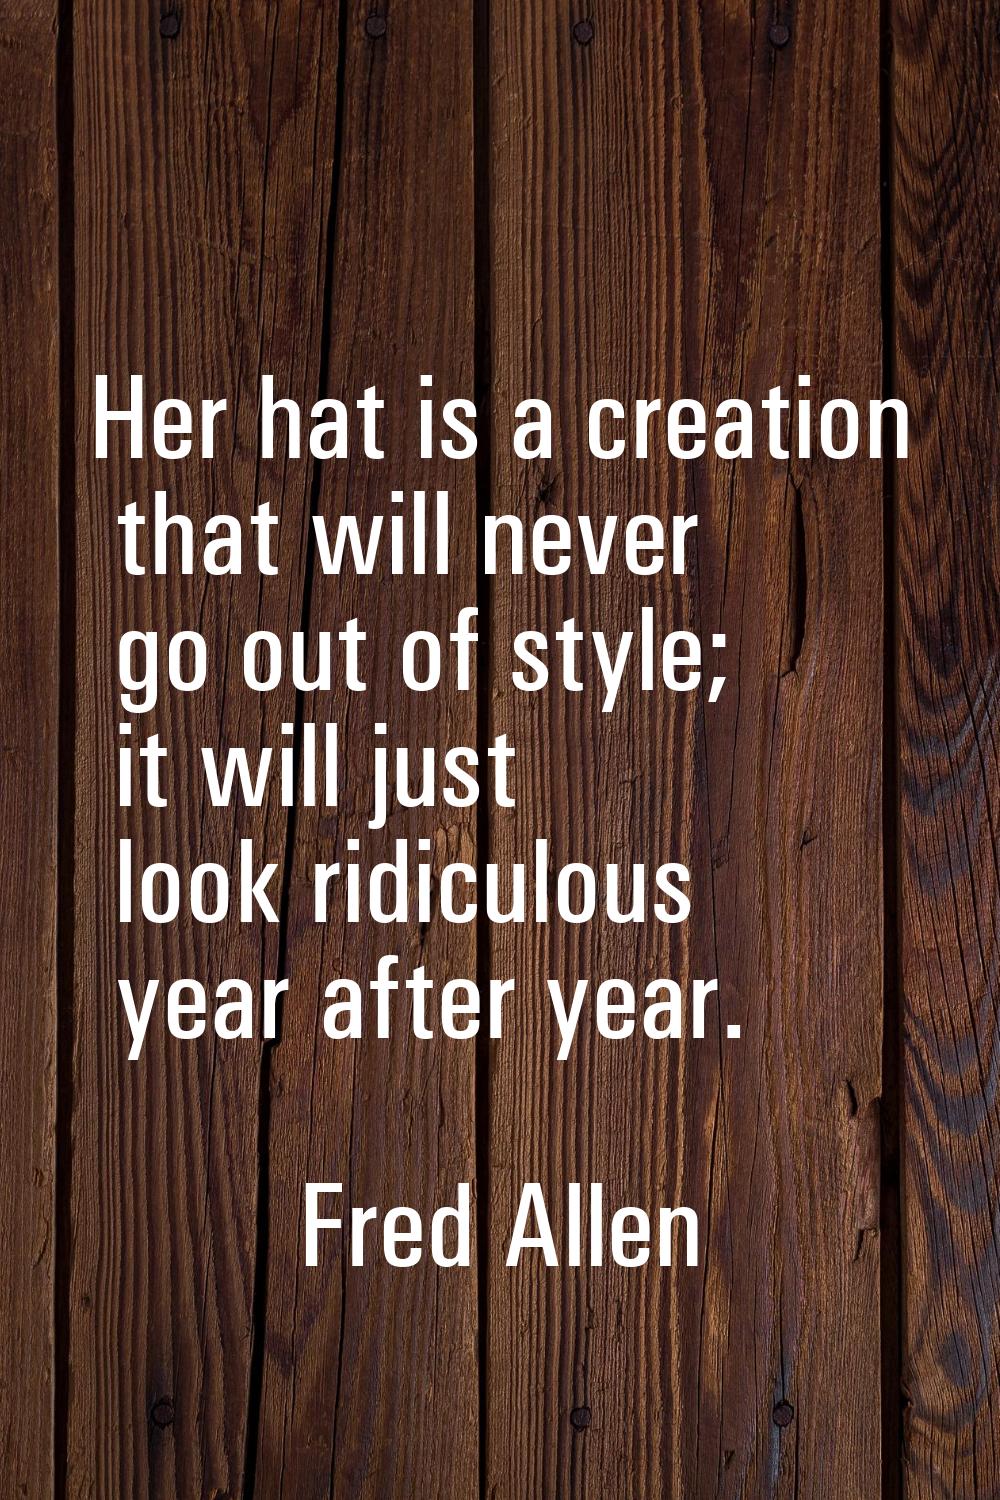 Her hat is a creation that will never go out of style; it will just look ridiculous year after year